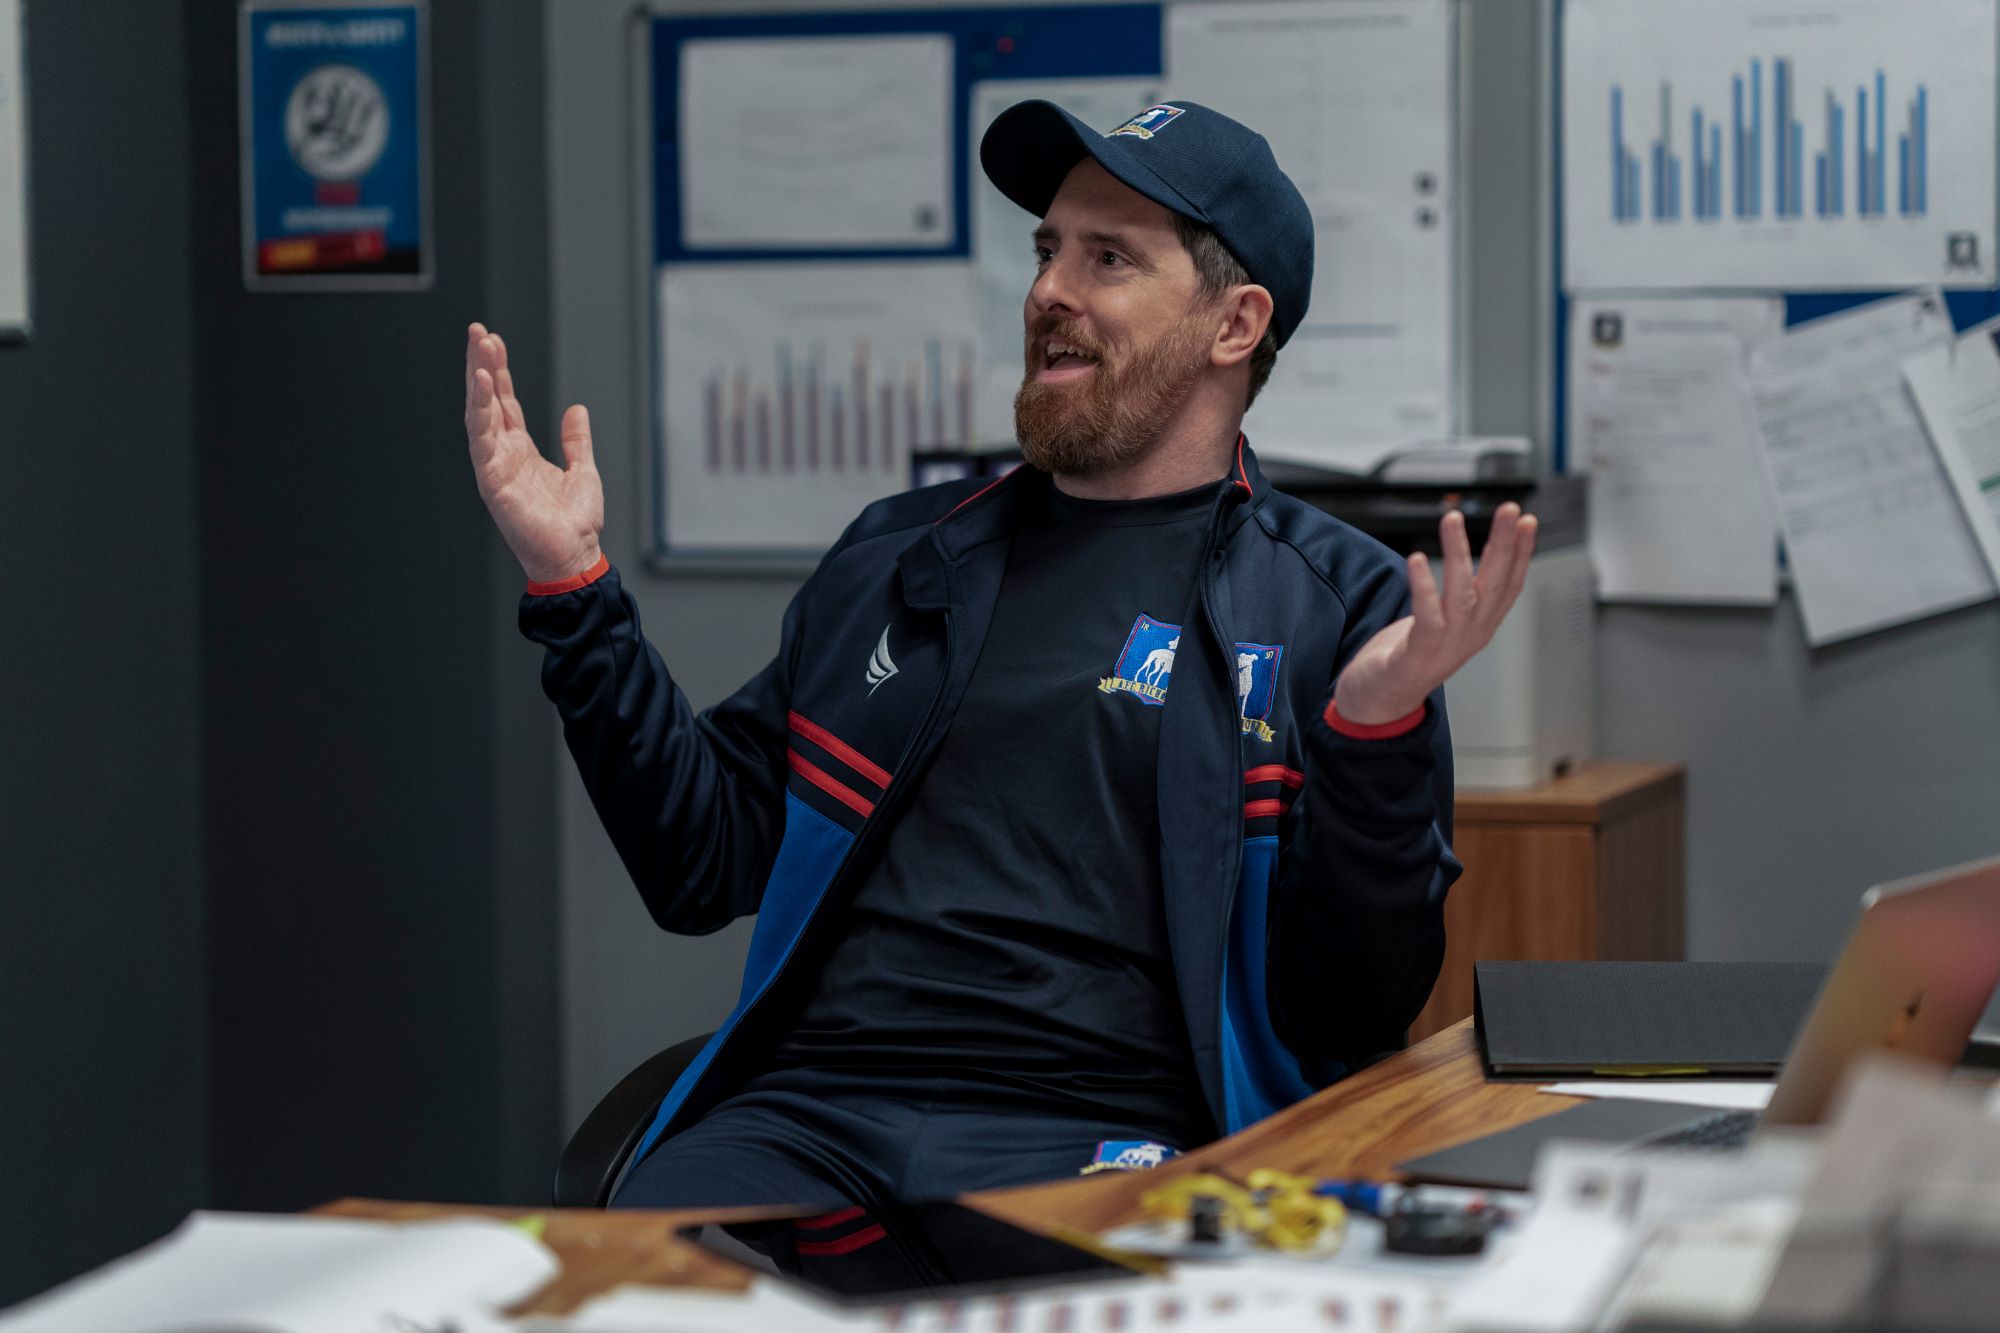 A scene from 'Ted Lasso' with Brendan Hunt's character sitting in a chair in the coach's office with hands thrown up wearing a black shirt with a blue vest with red stripes on the chest and a blue hat.